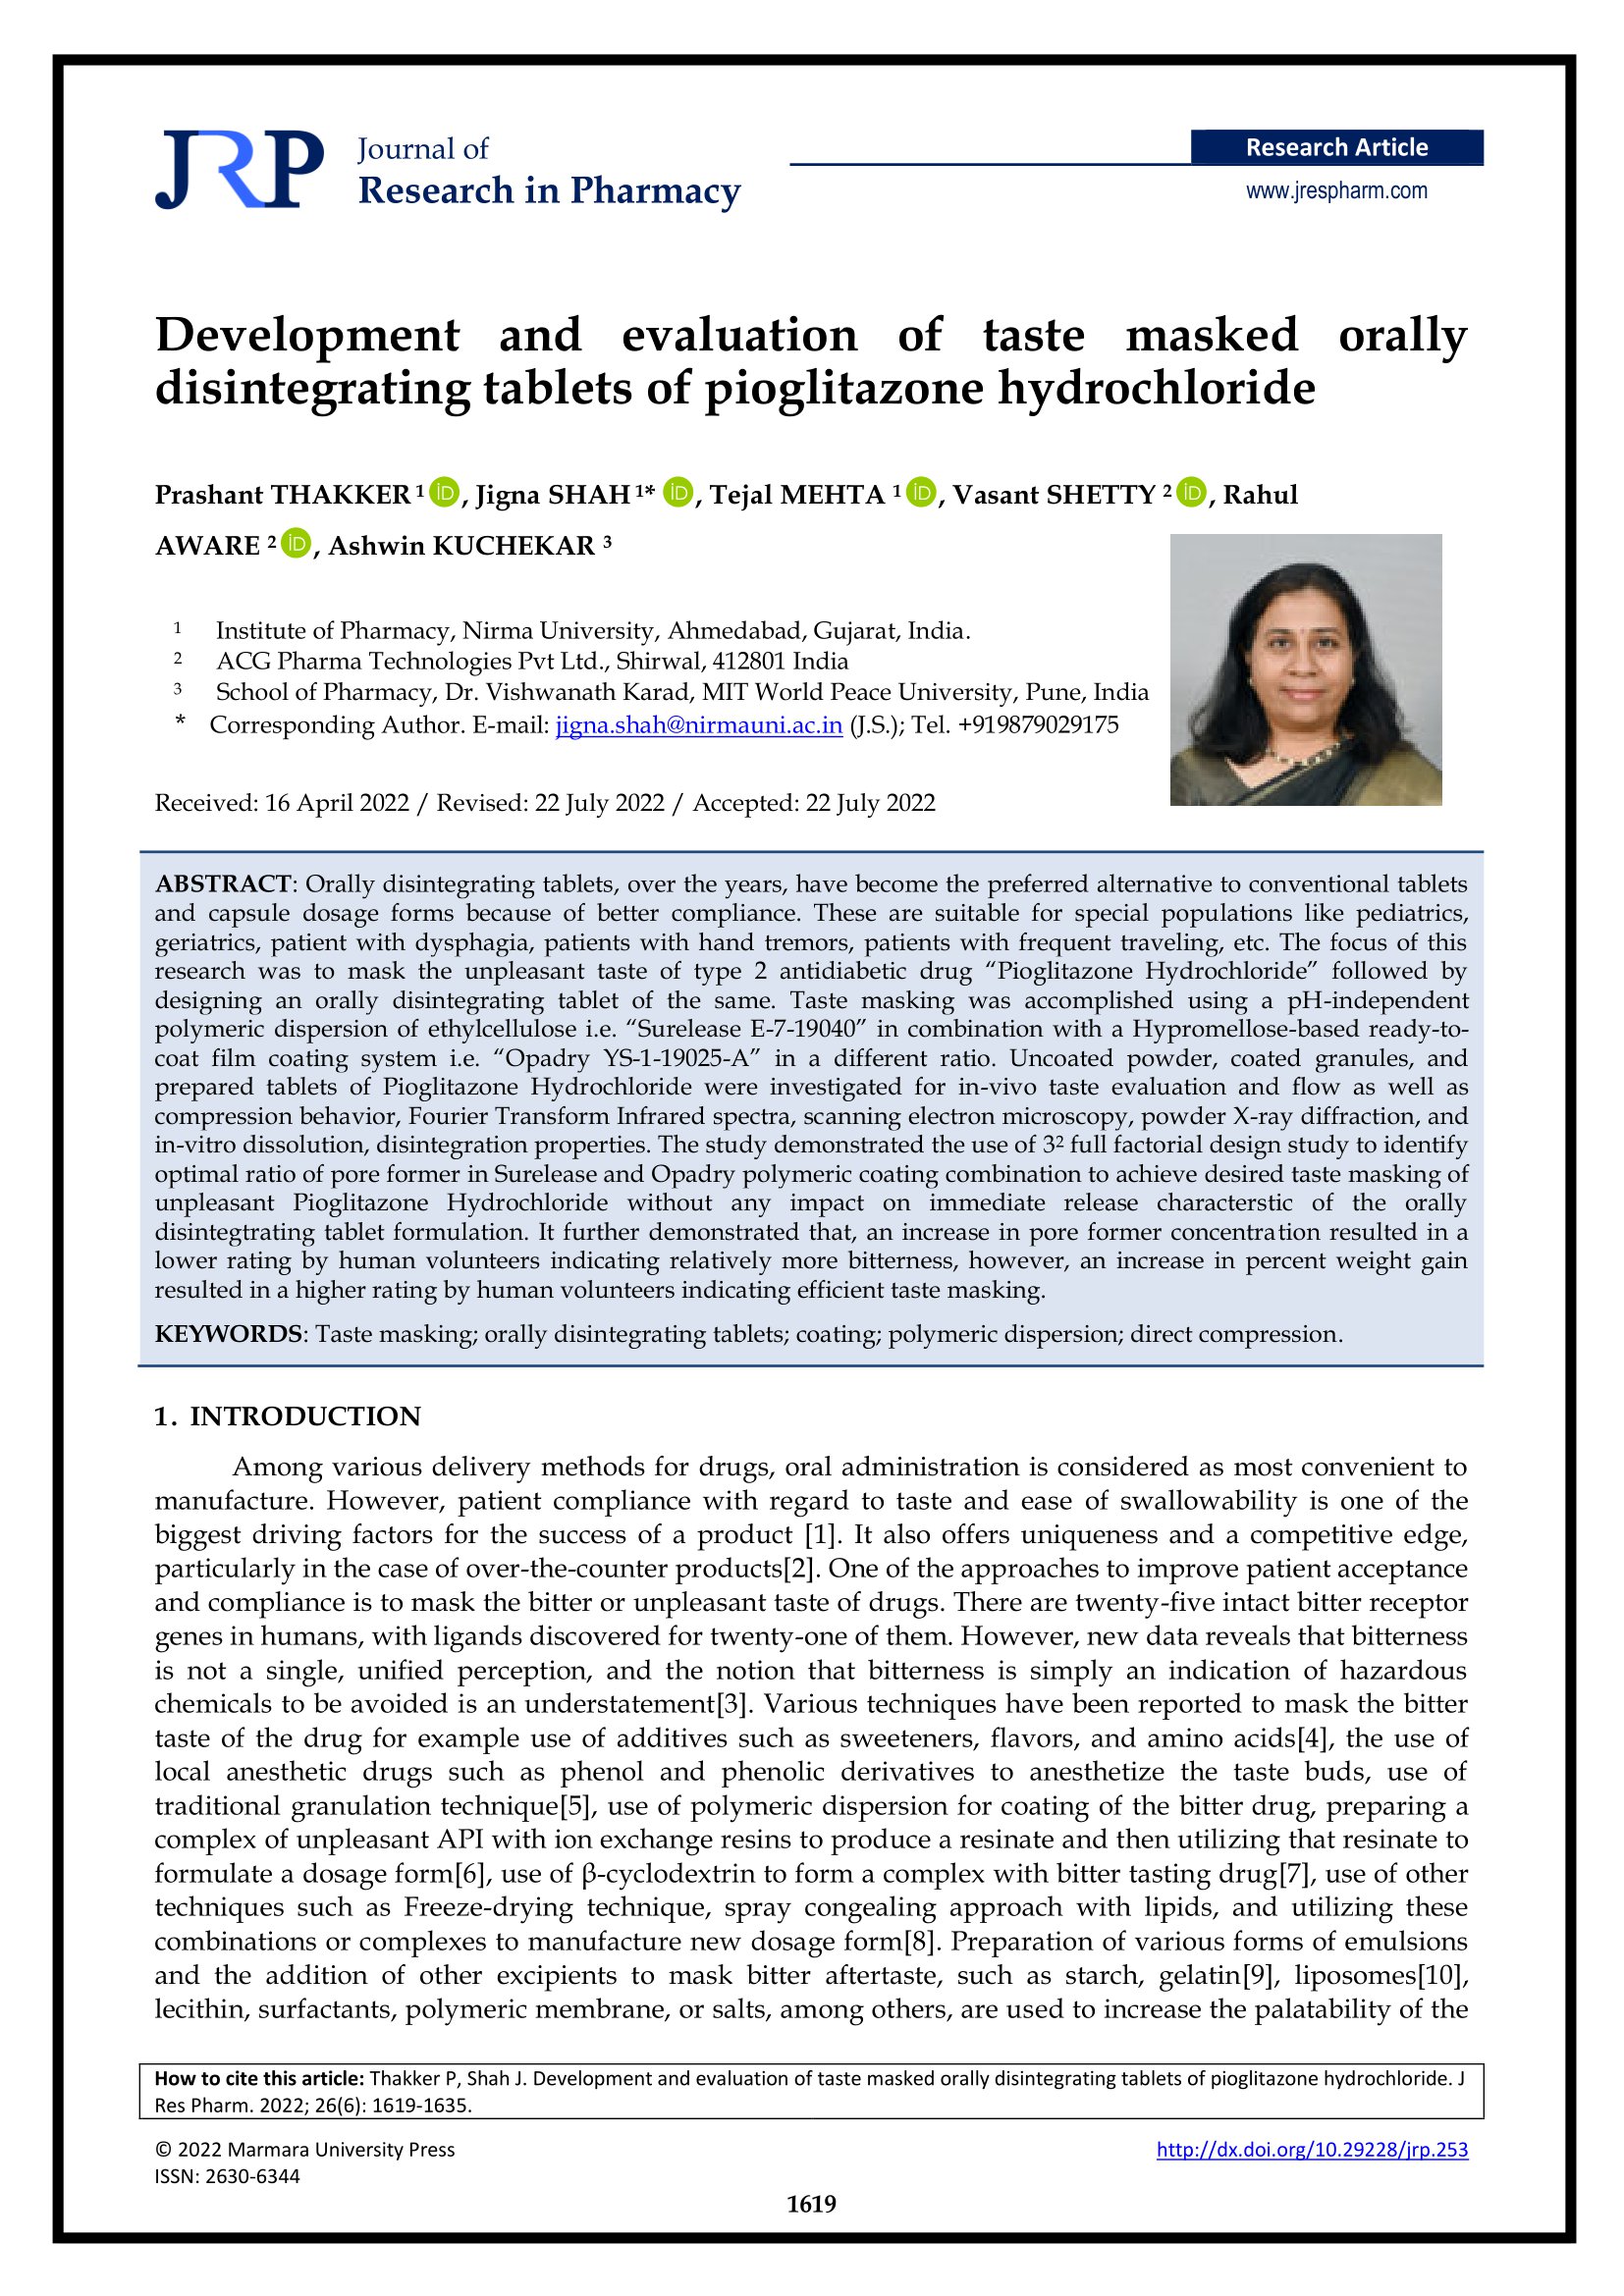 Development and evaluation of taste masked orally disintegrating tablets of pioglitazone hydrochloride